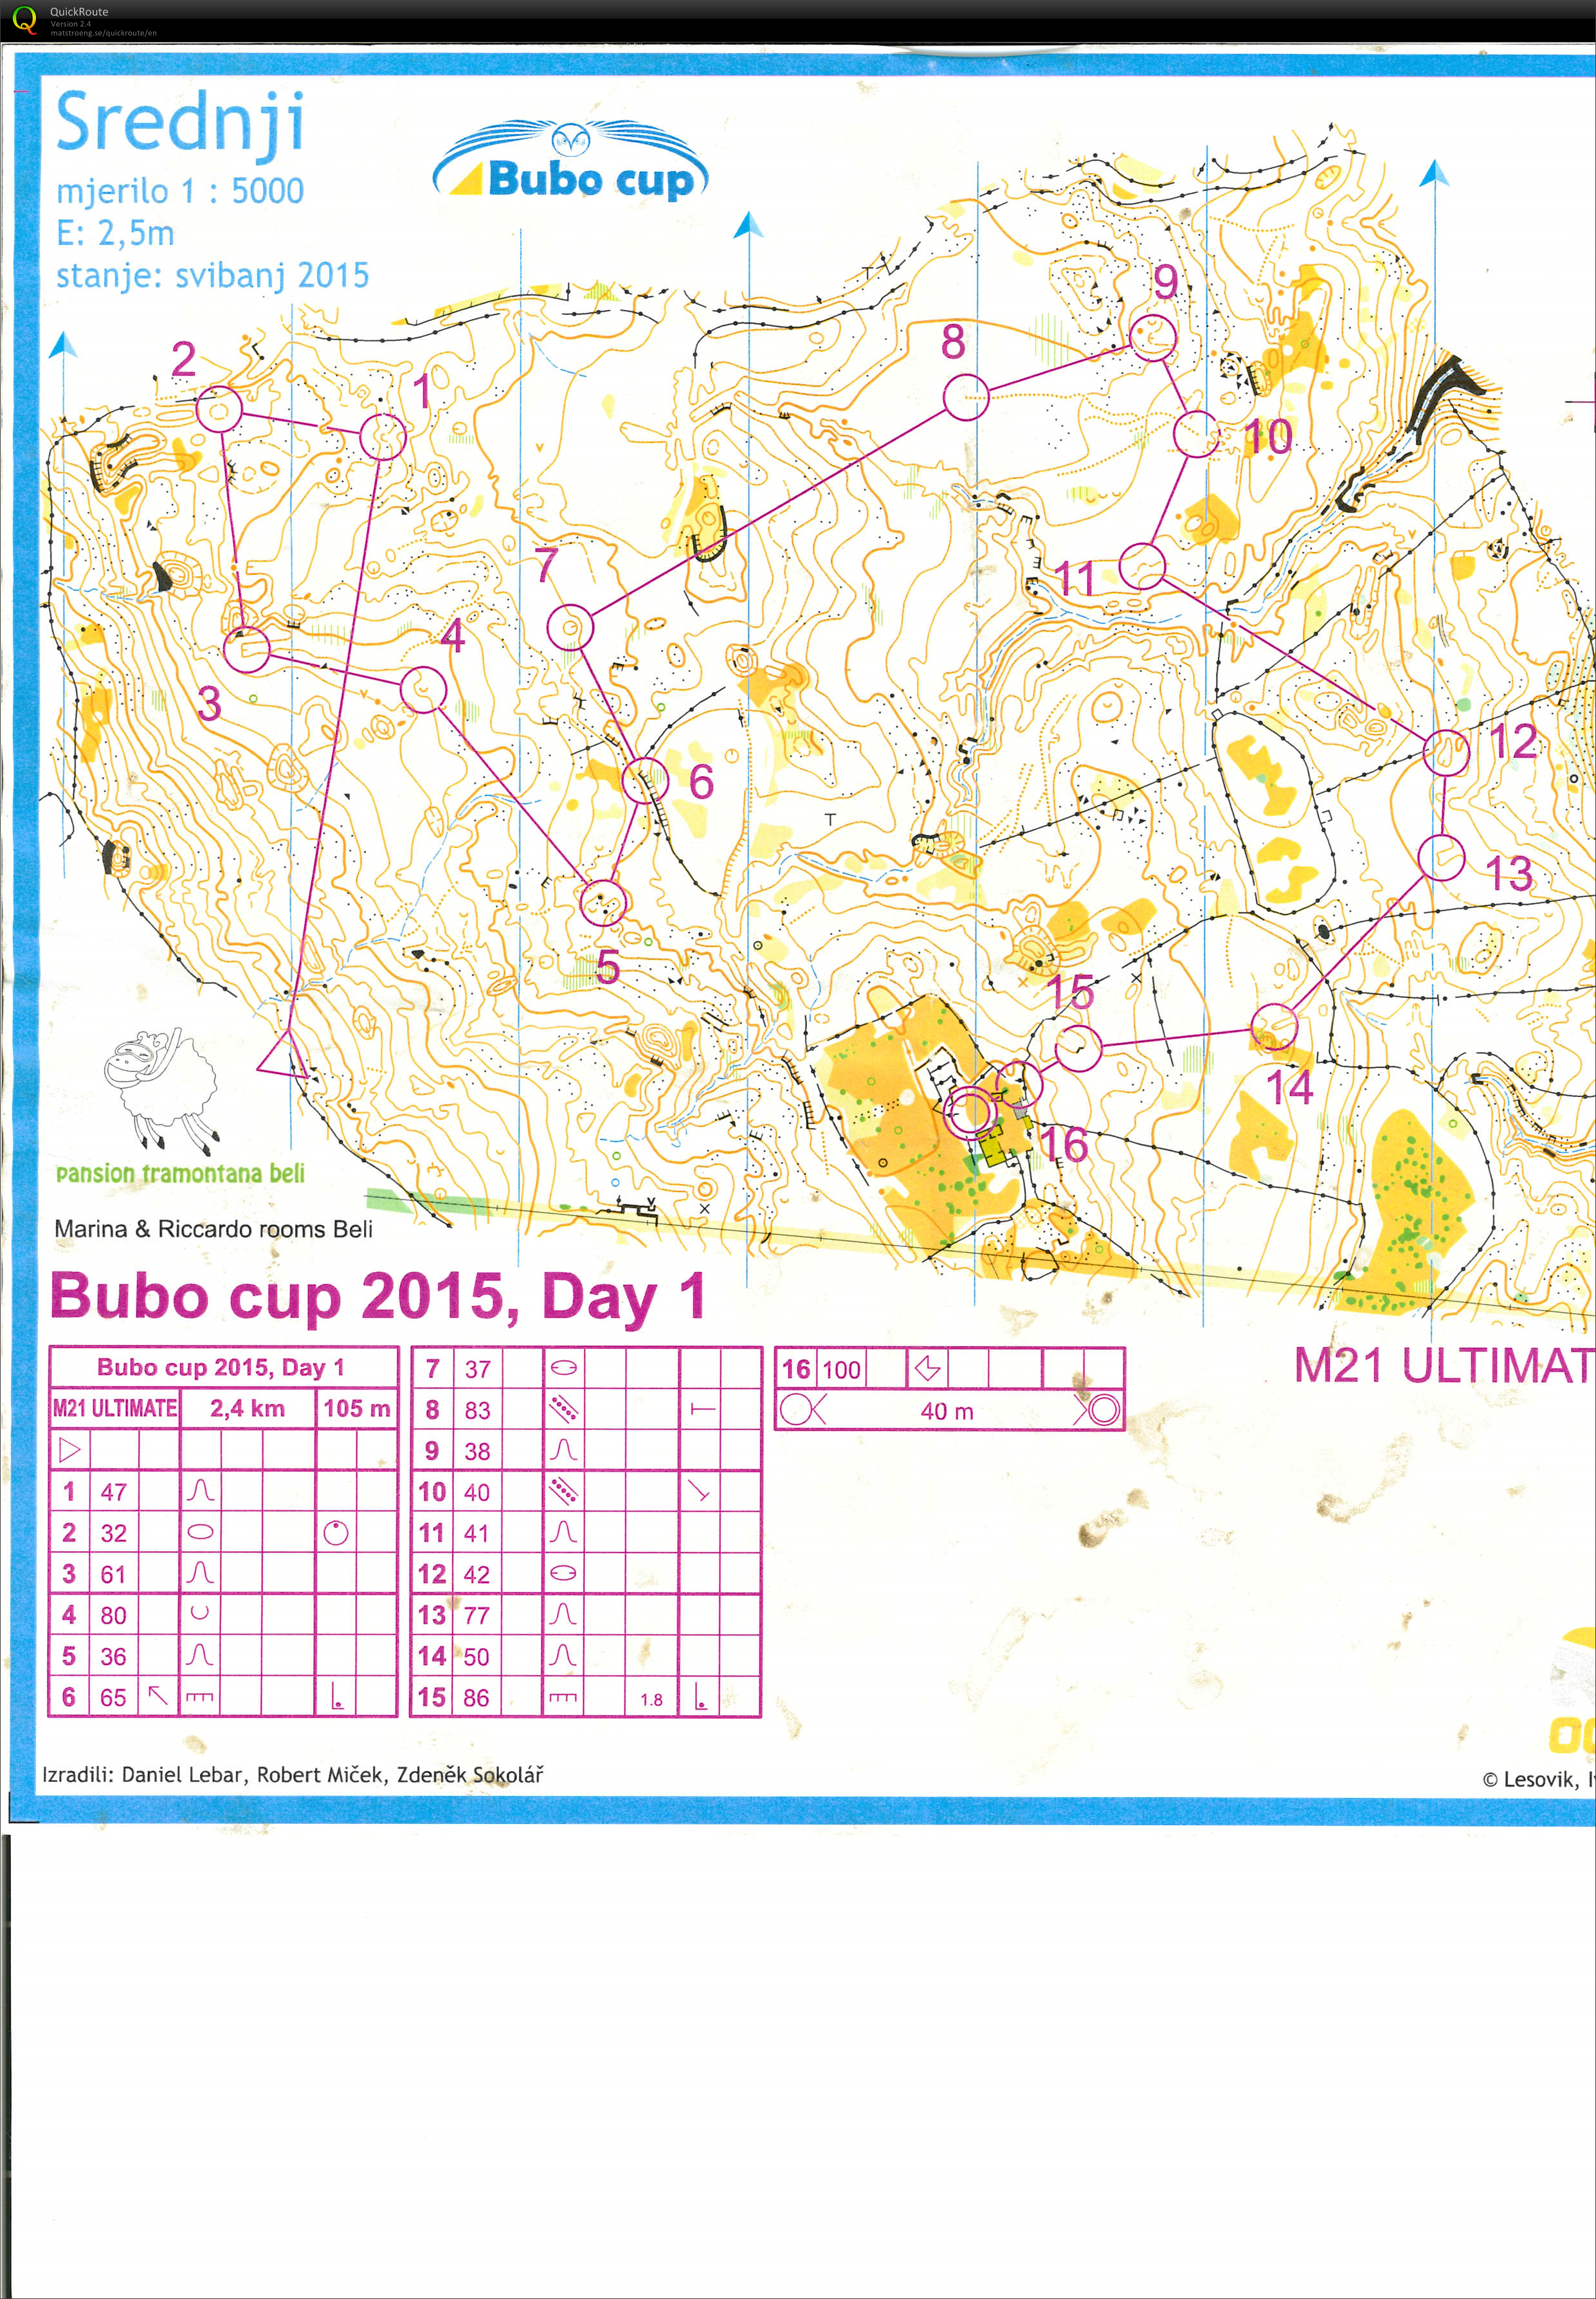 Bubocup 2015 Stage 1 (01.08.2015)